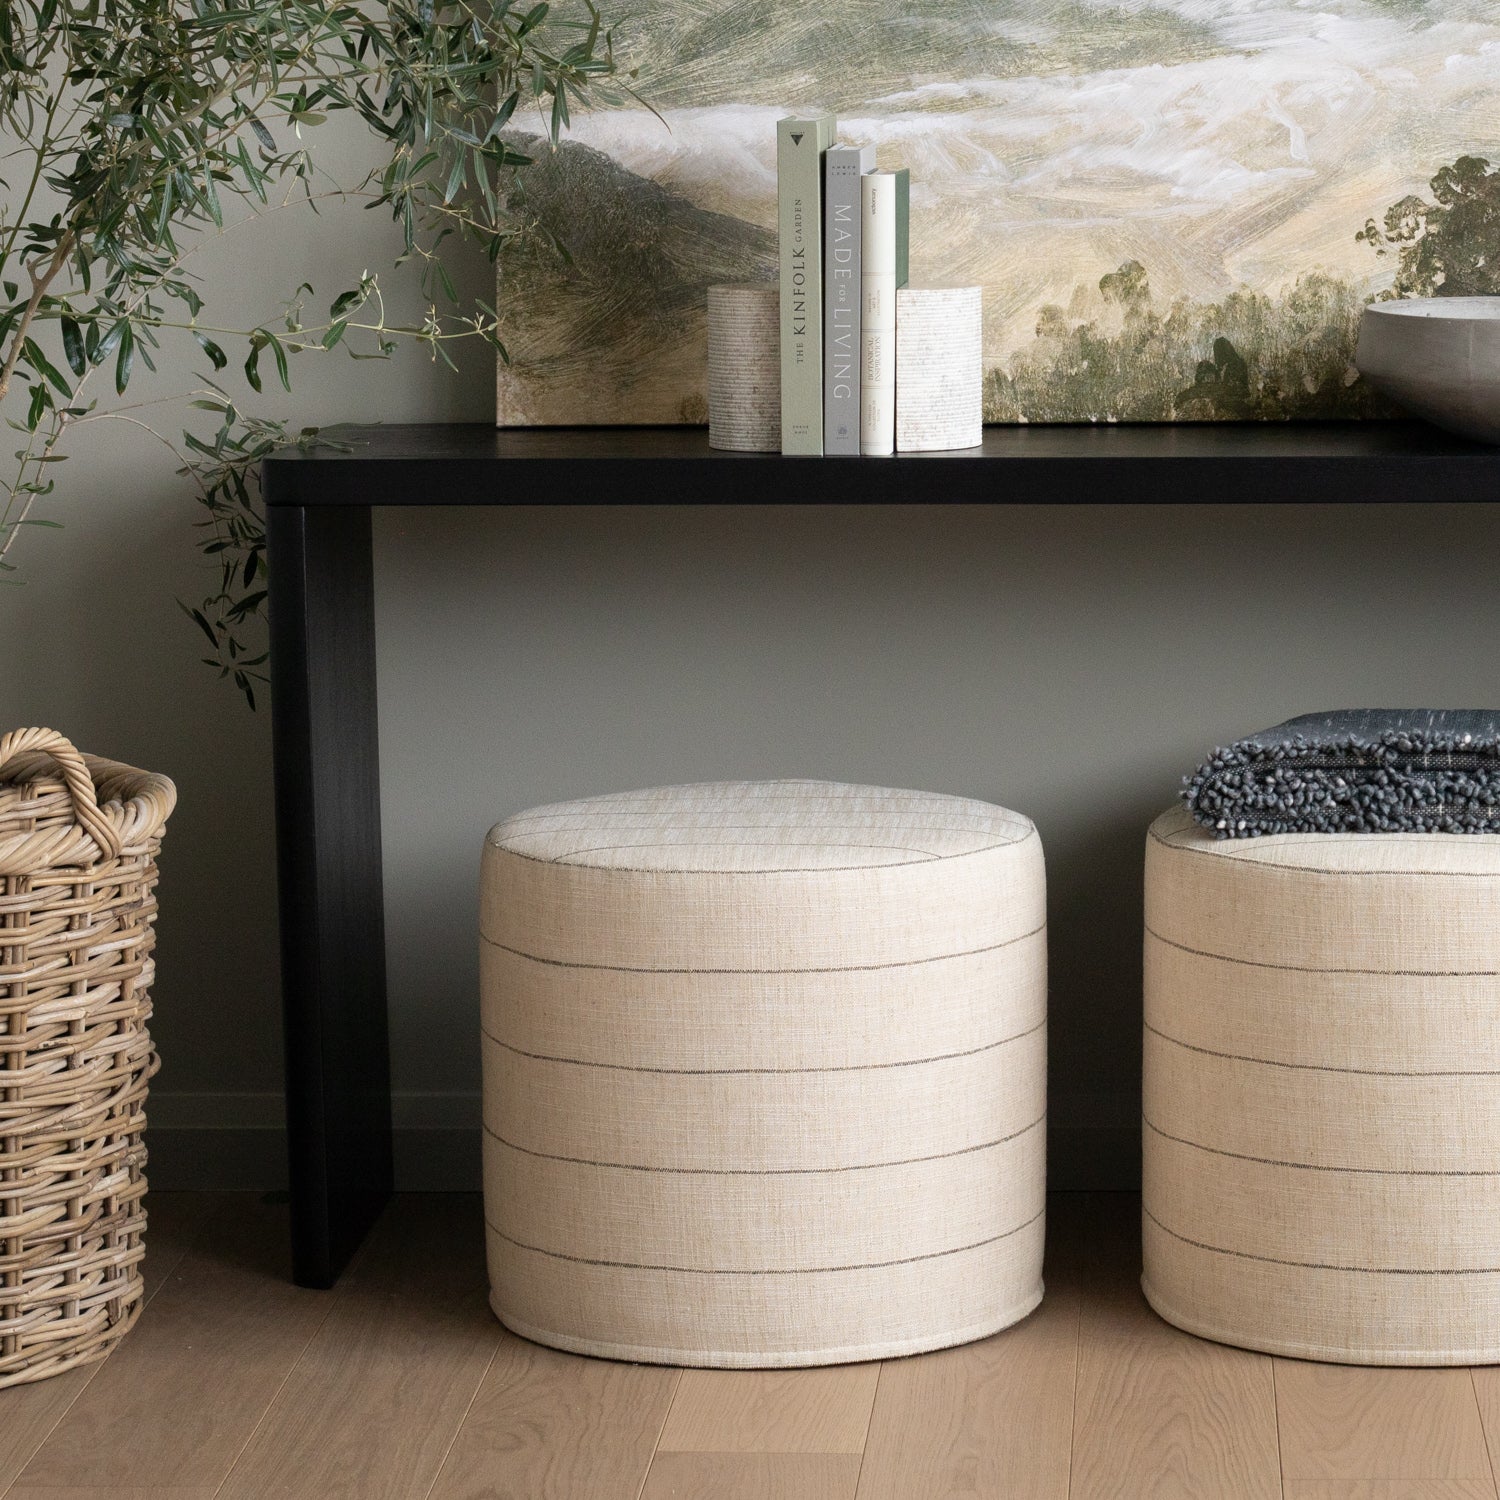 Beige striped tound ottoman, made high performance fabric, from Tonic Living.